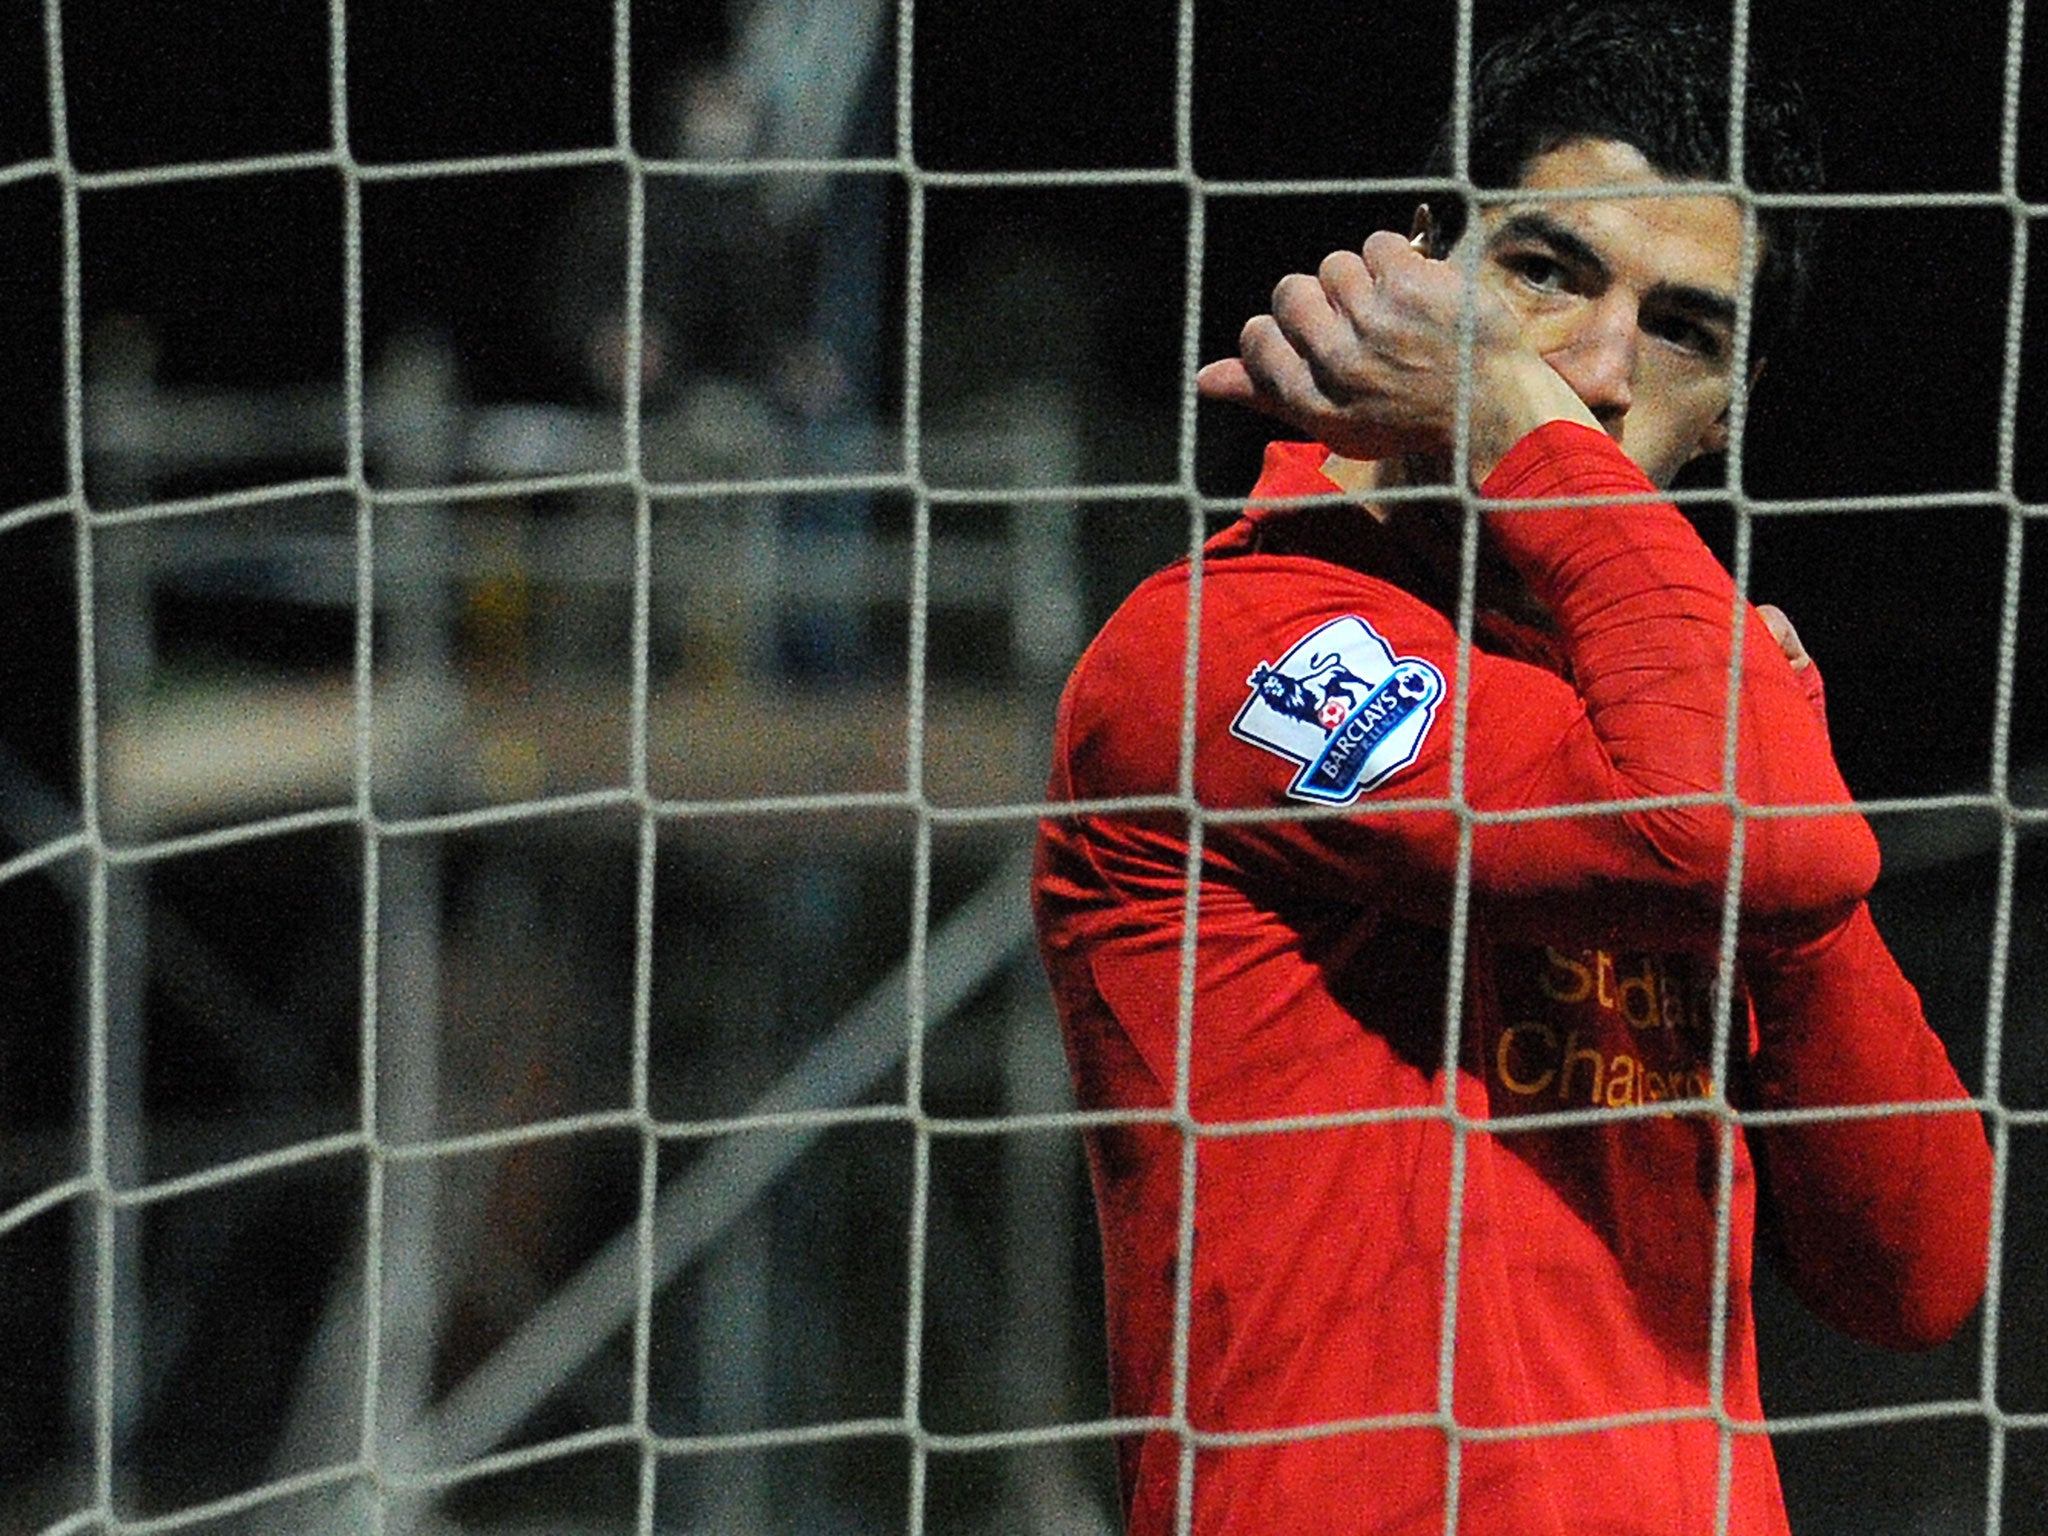 Discipline Yellow/Red Cards Van Persie – 7/0 Suarez – 4/0 Despite his reputation, Suarez has picked up fewer bookings than Van Persie this season. However he has courted controversy over diving and more recently for usi